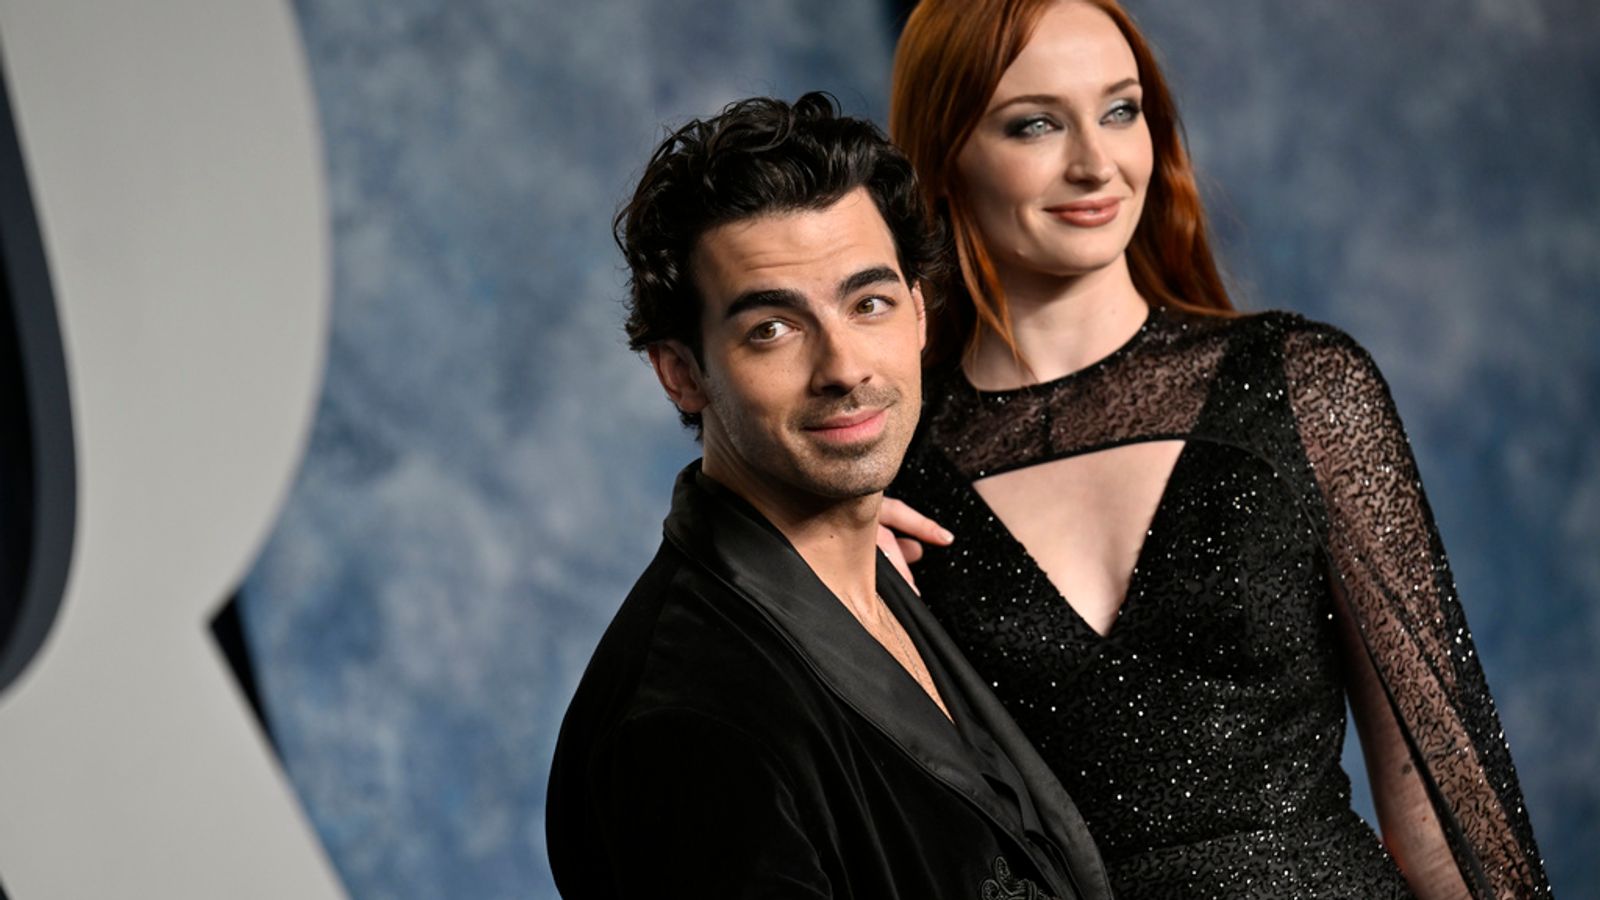 Joe Jonas files for divorce from Sophie Turner, reportedly calling their marriage 'irretrievably broken'